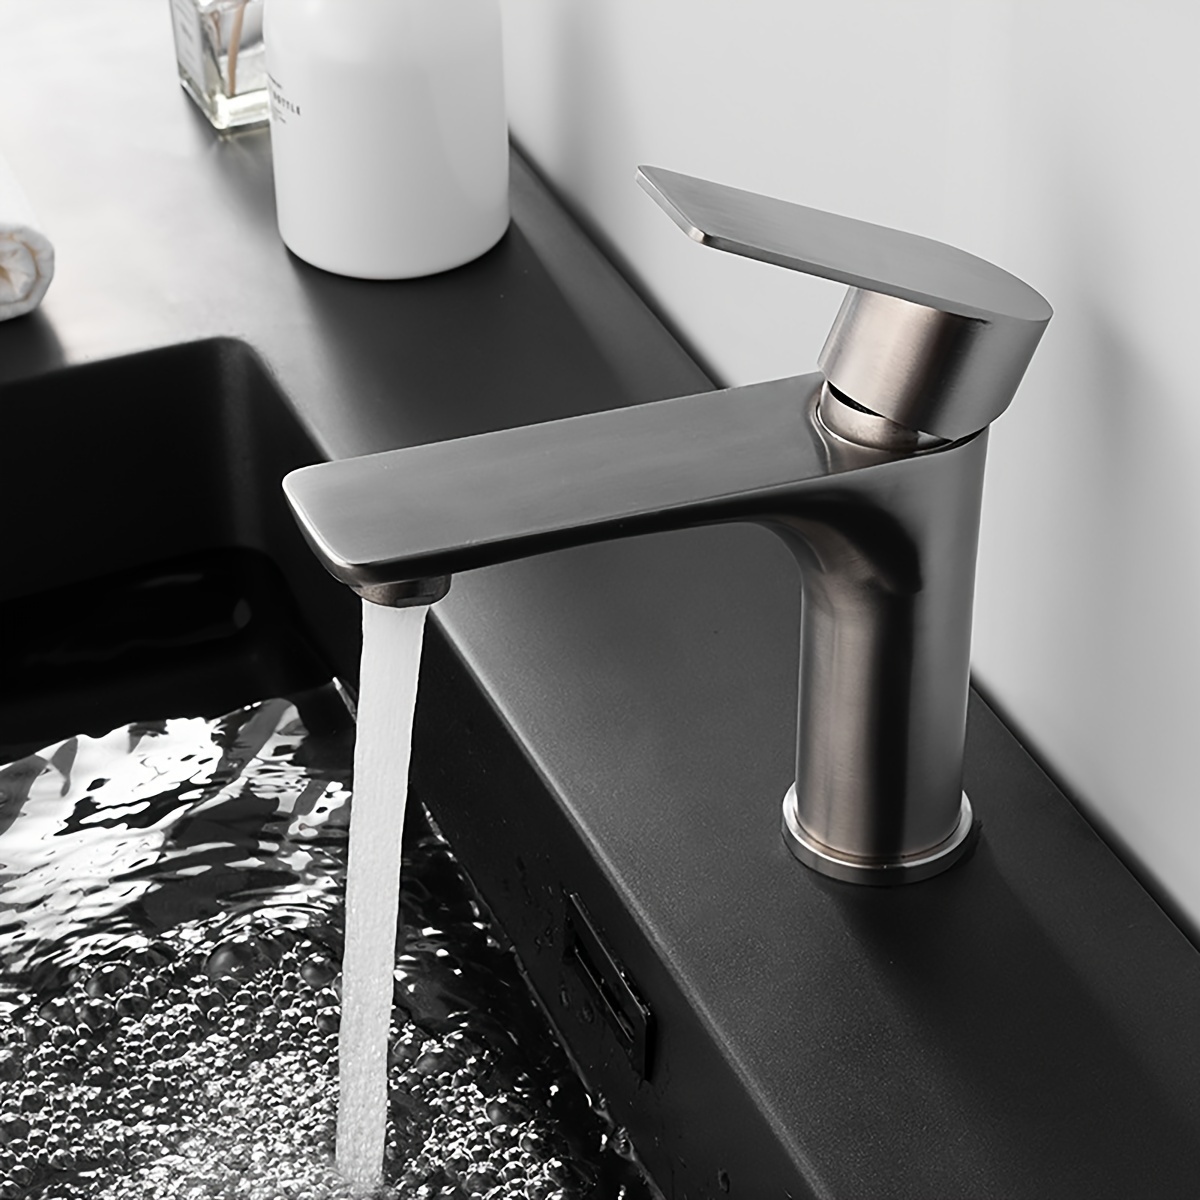 

Stainless Steel Hot & Cold Water Faucet For Bathroom Sink - Brushed Finish, Deck Mount, Ball Valve